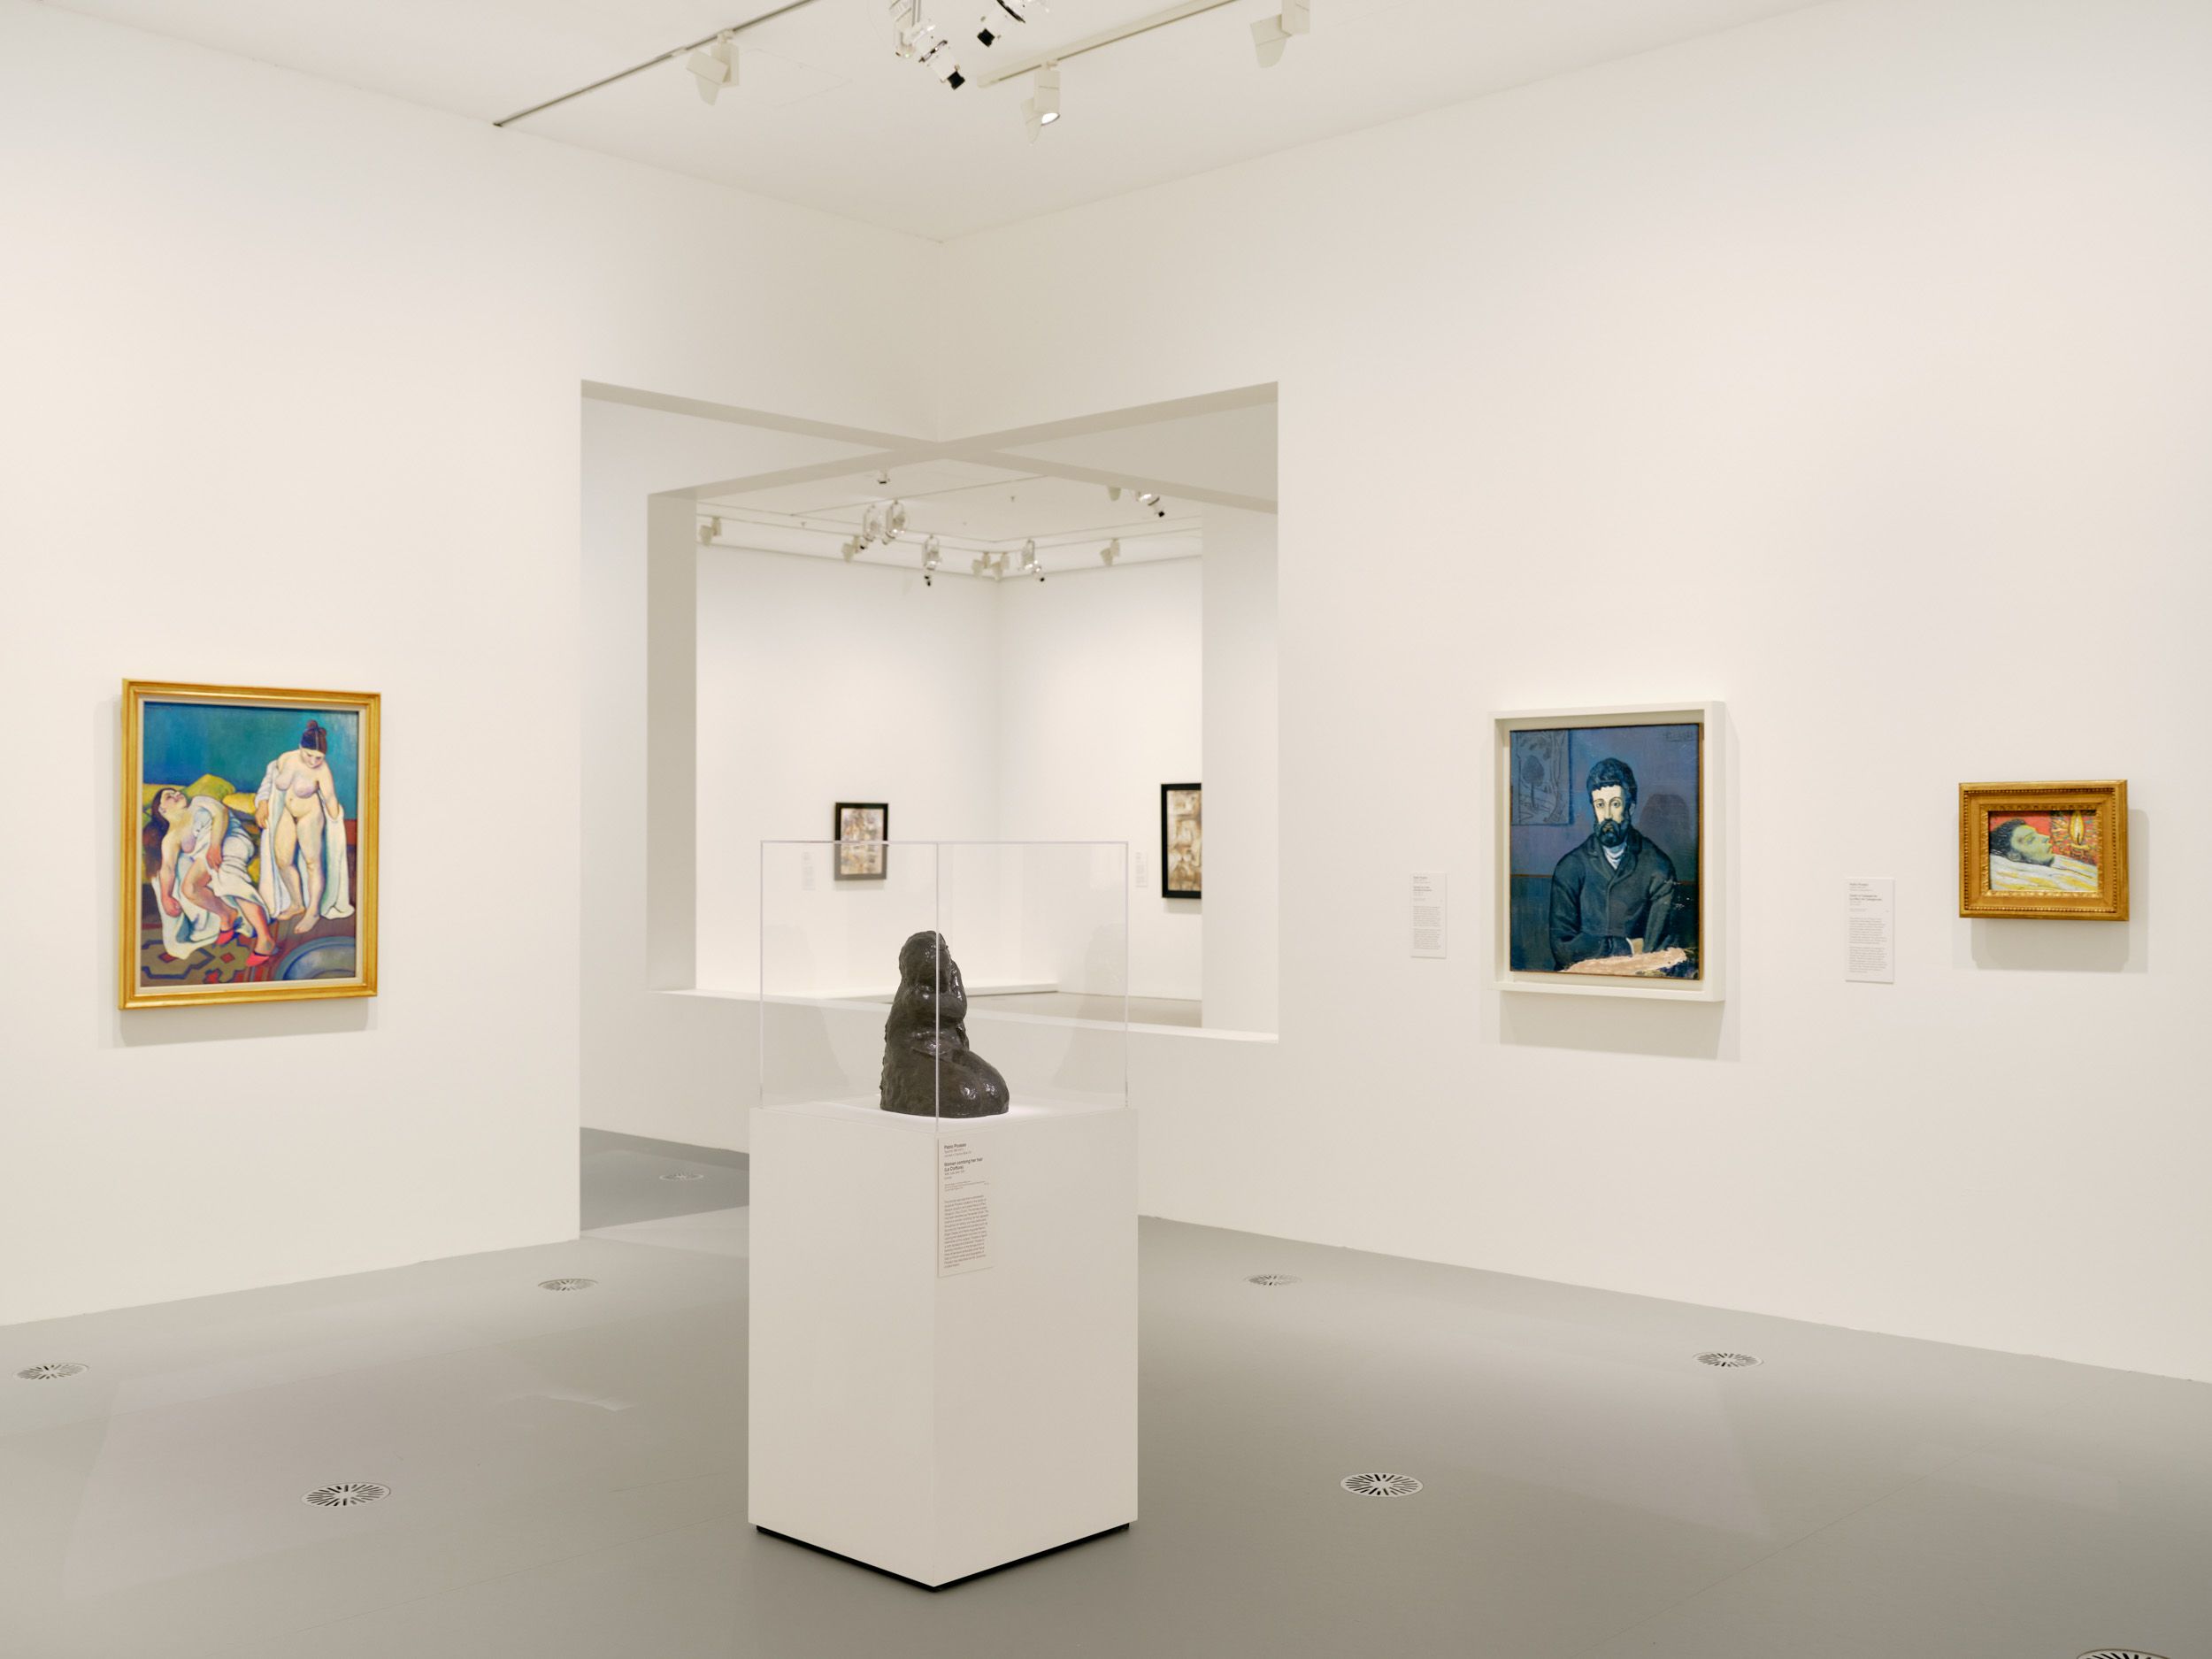 Installation view of <em>The Picasso Century</em> on display from 10 June-9 October 2022 at NGV International, Melbourne. Photo: Tom Ross.